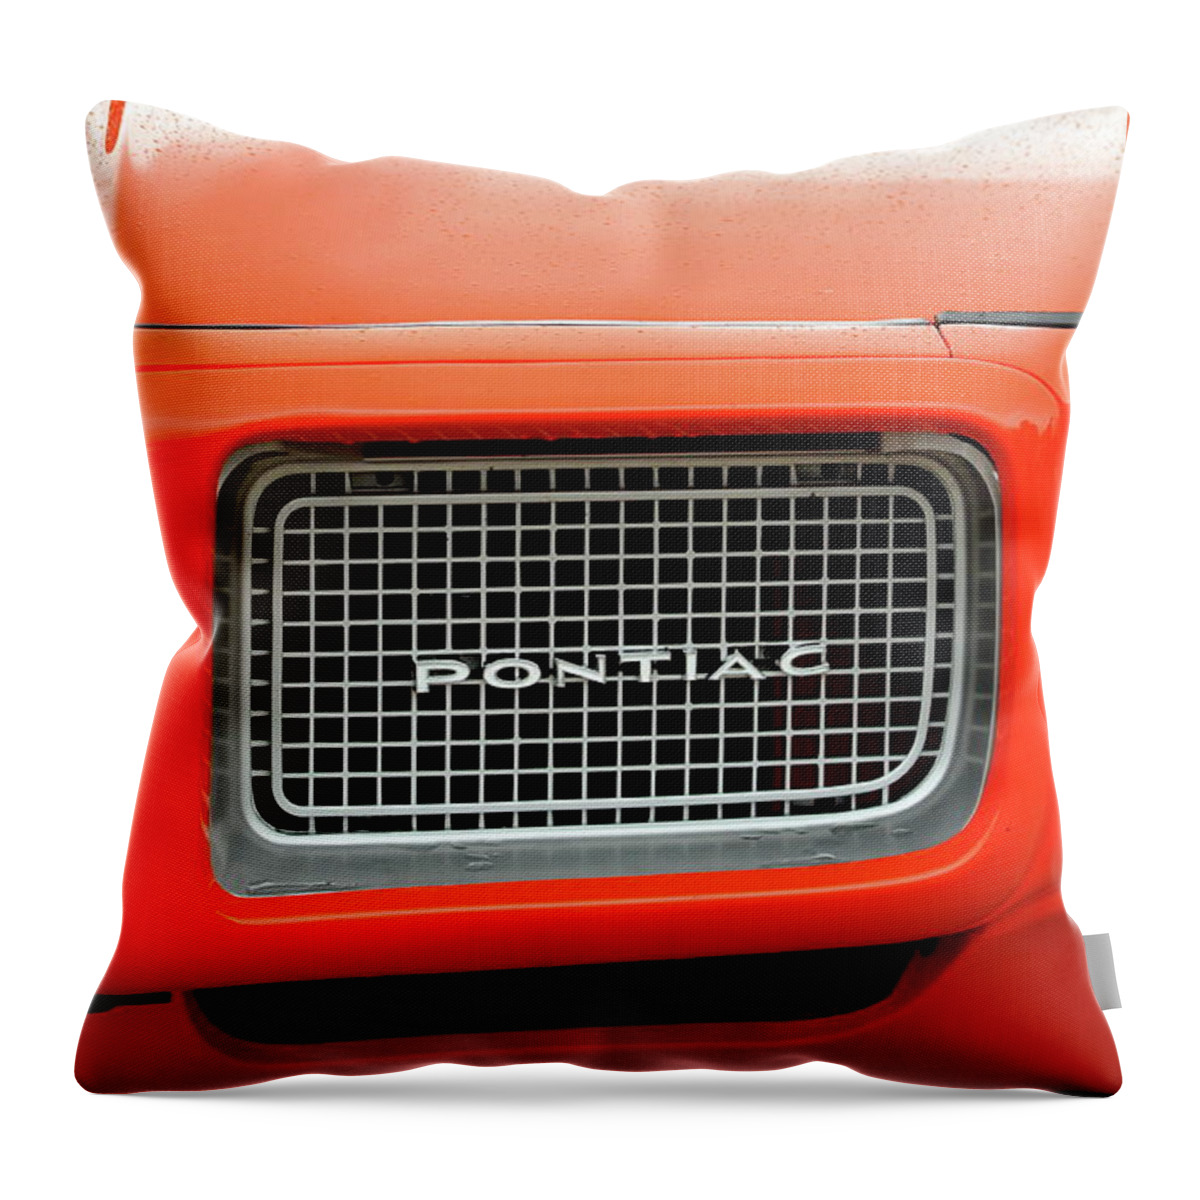 Pontiac Gto Throw Pillow featuring the photograph Ooooo Orange by Lens Art Photography By Larry Trager